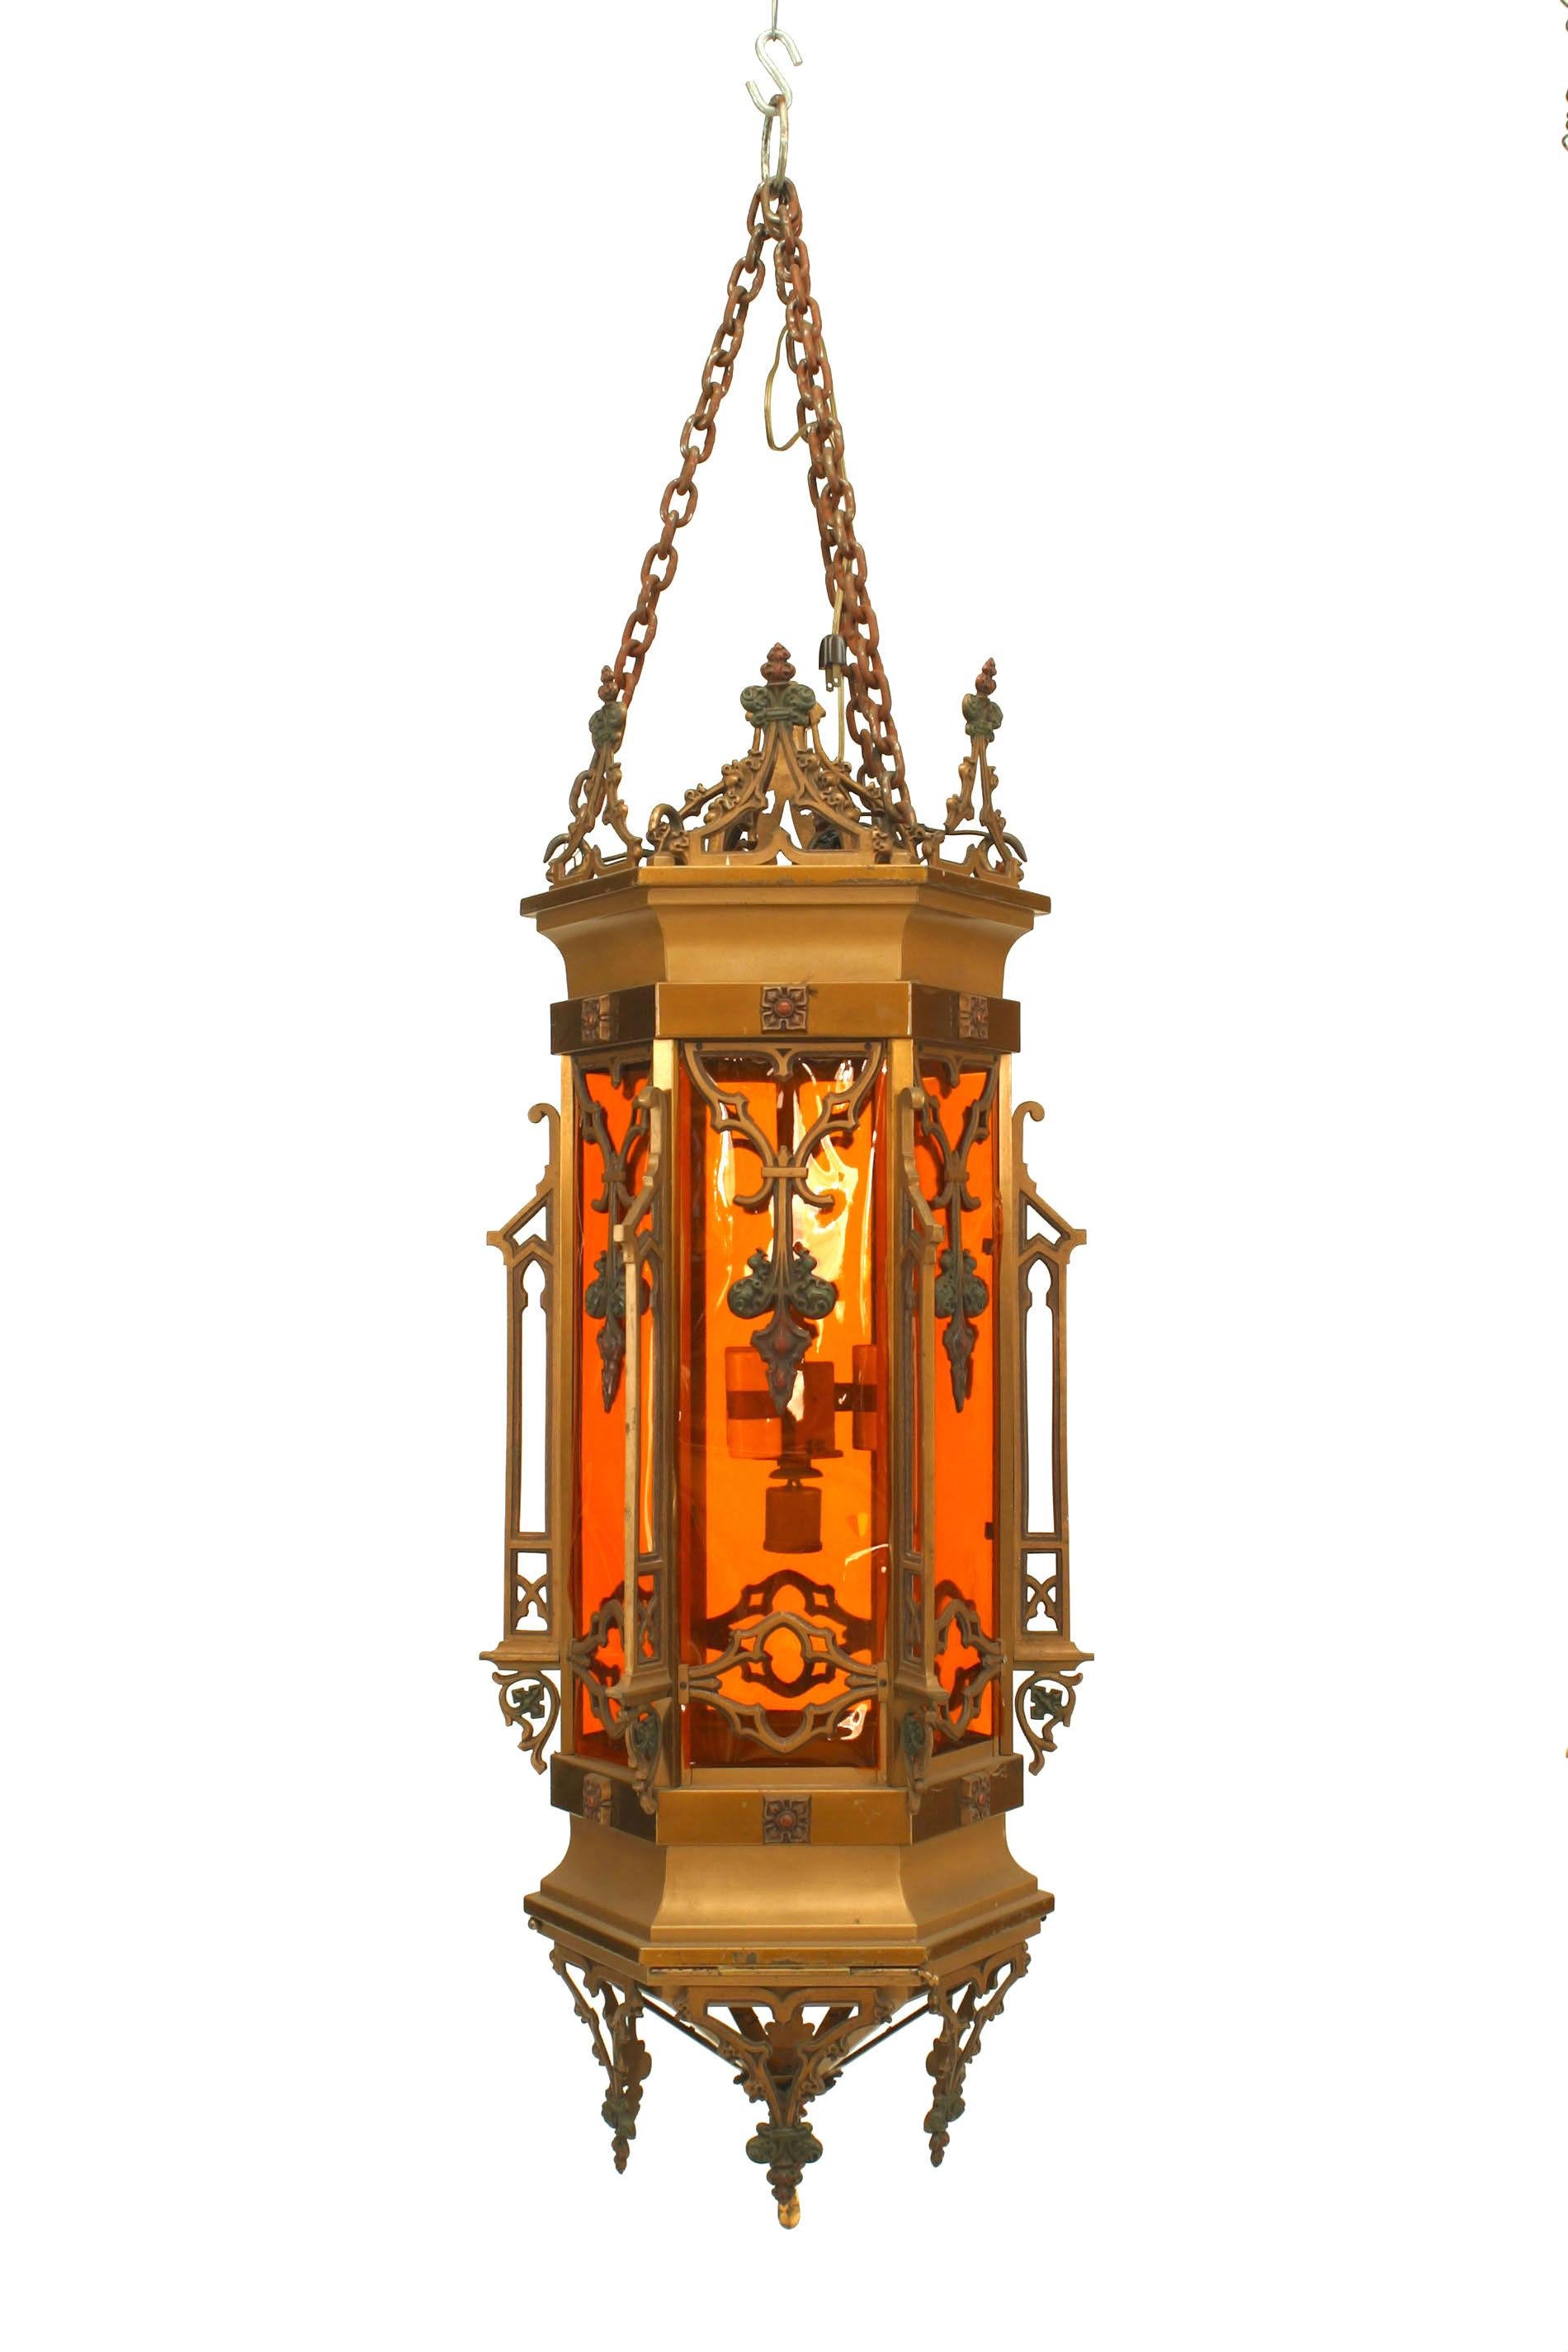 4 English Gothic Revival-style (19/20th Century) bronze 6 sided hanging lanterns with filigree panels. (PRICED EACH).
